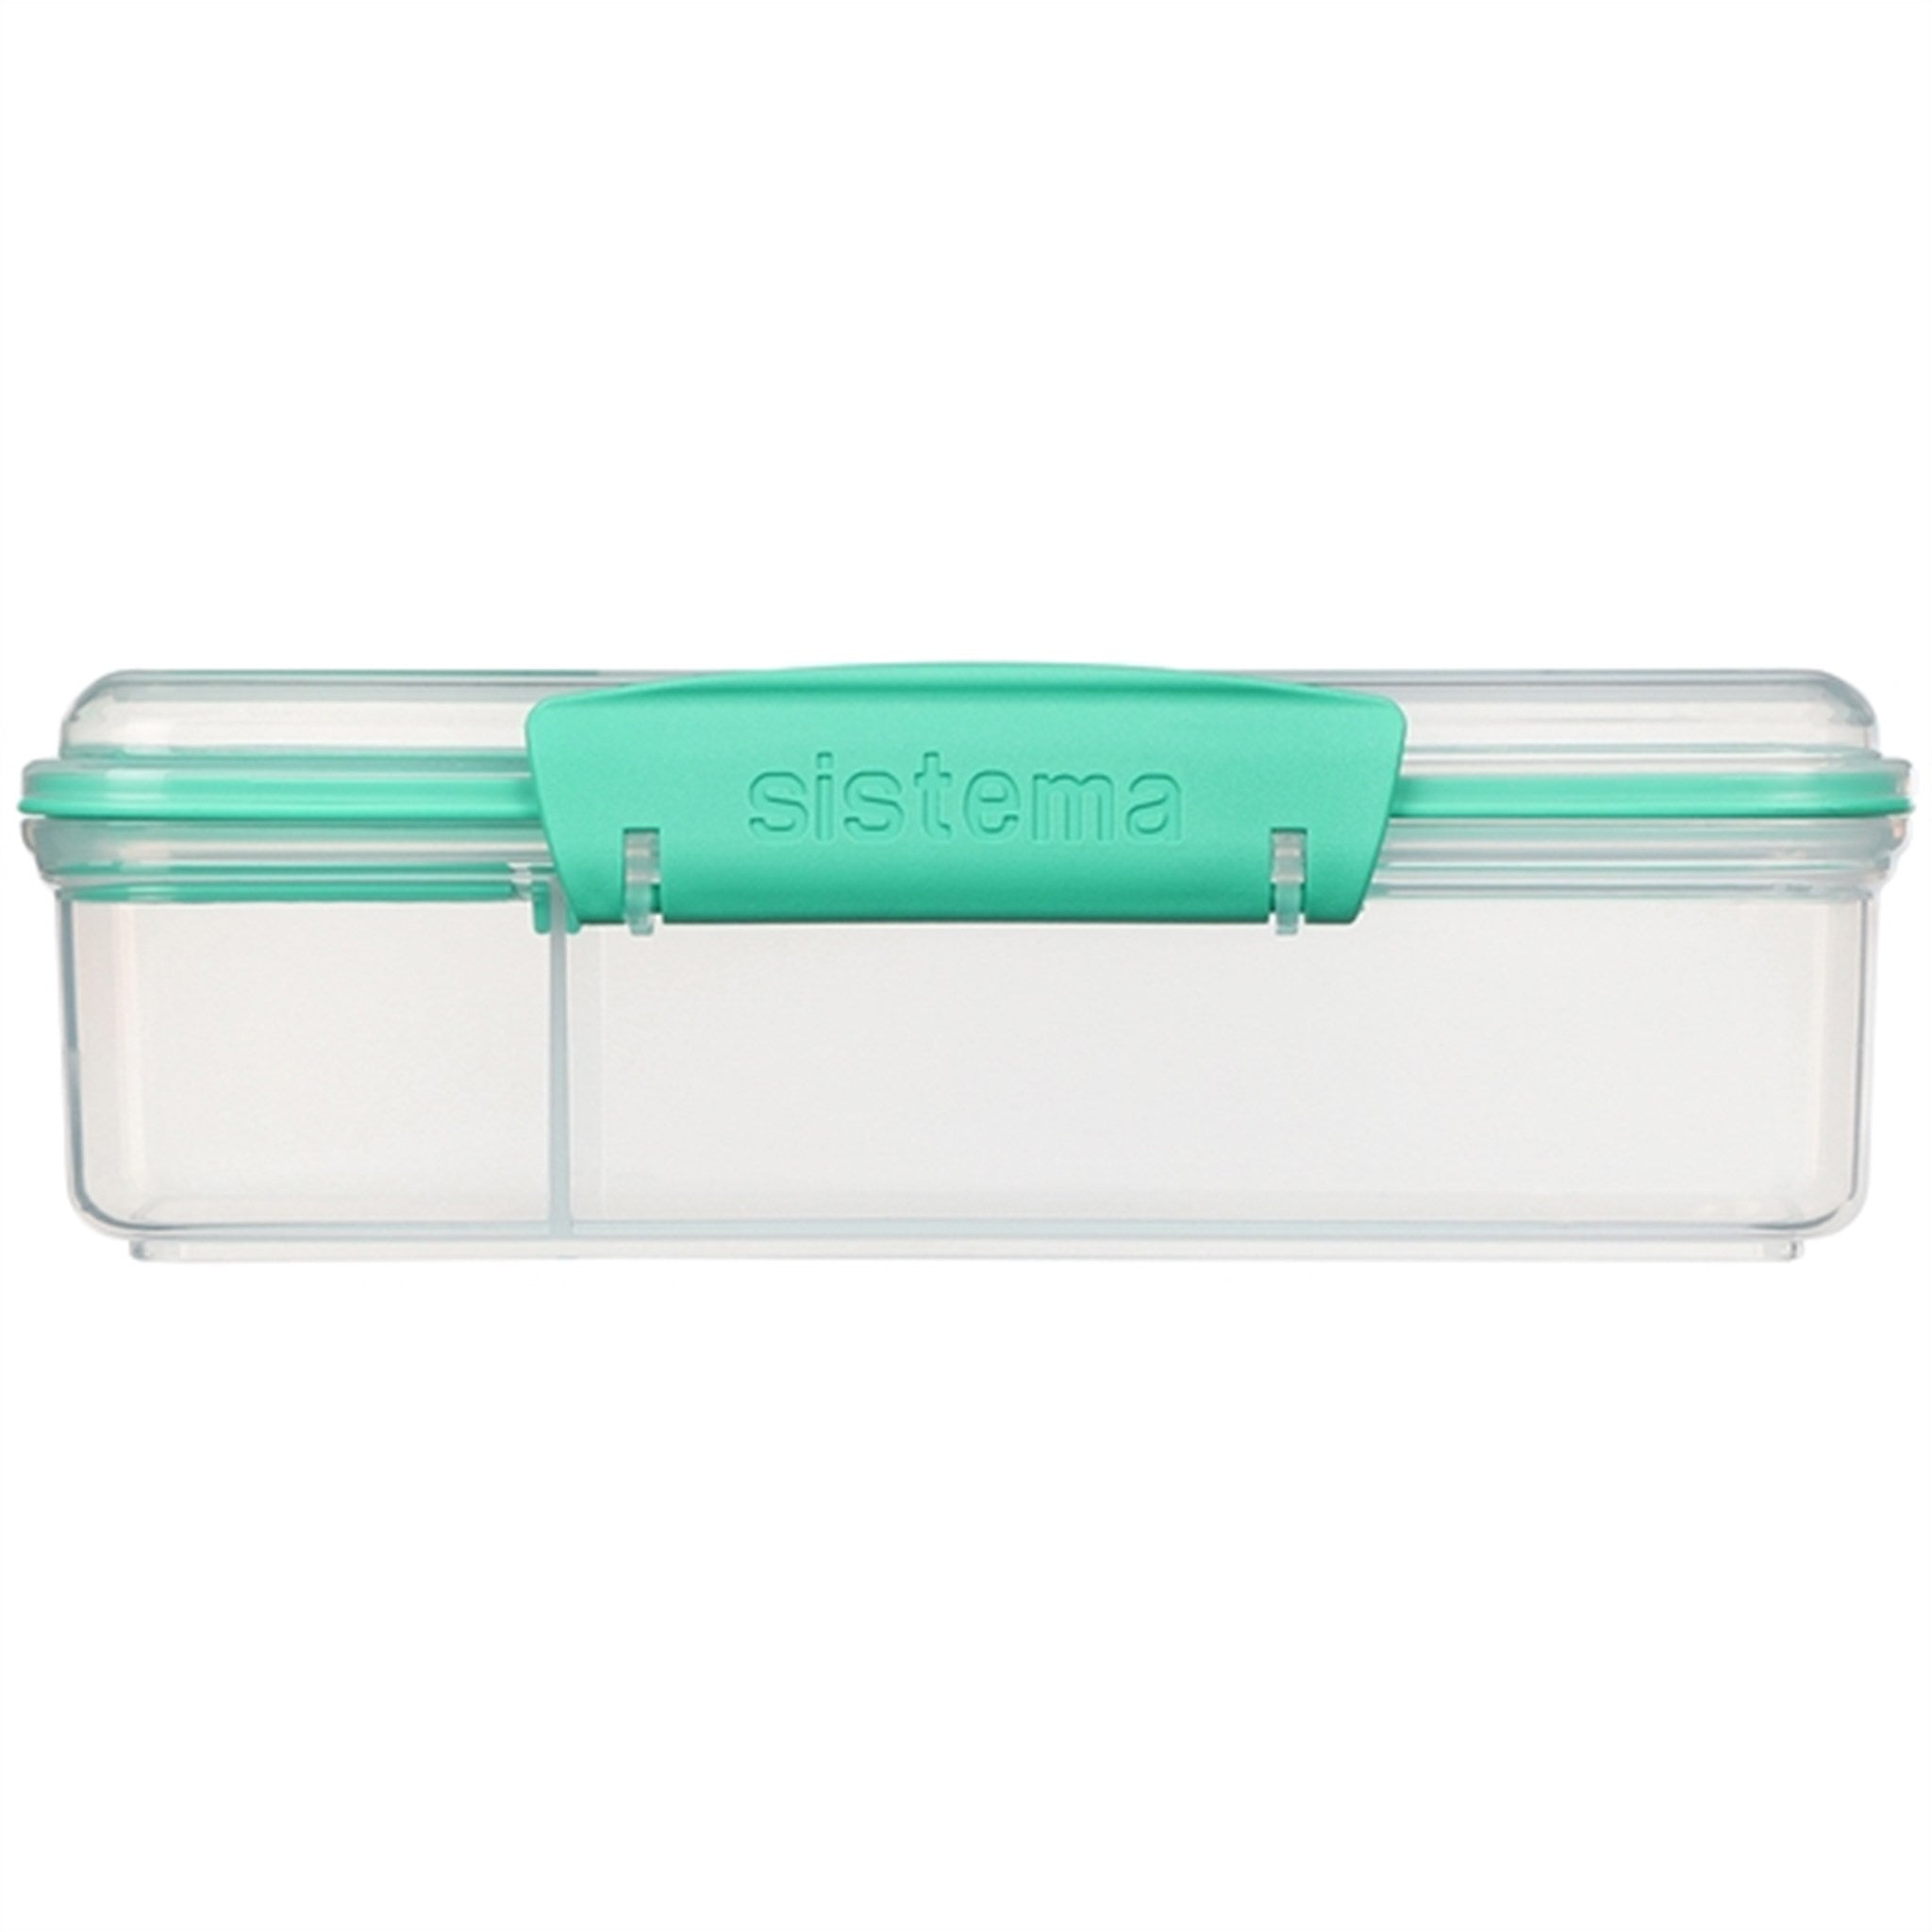 Sistema To Go Snack Attack Lunchlåda 410 ml Minty Teal 2